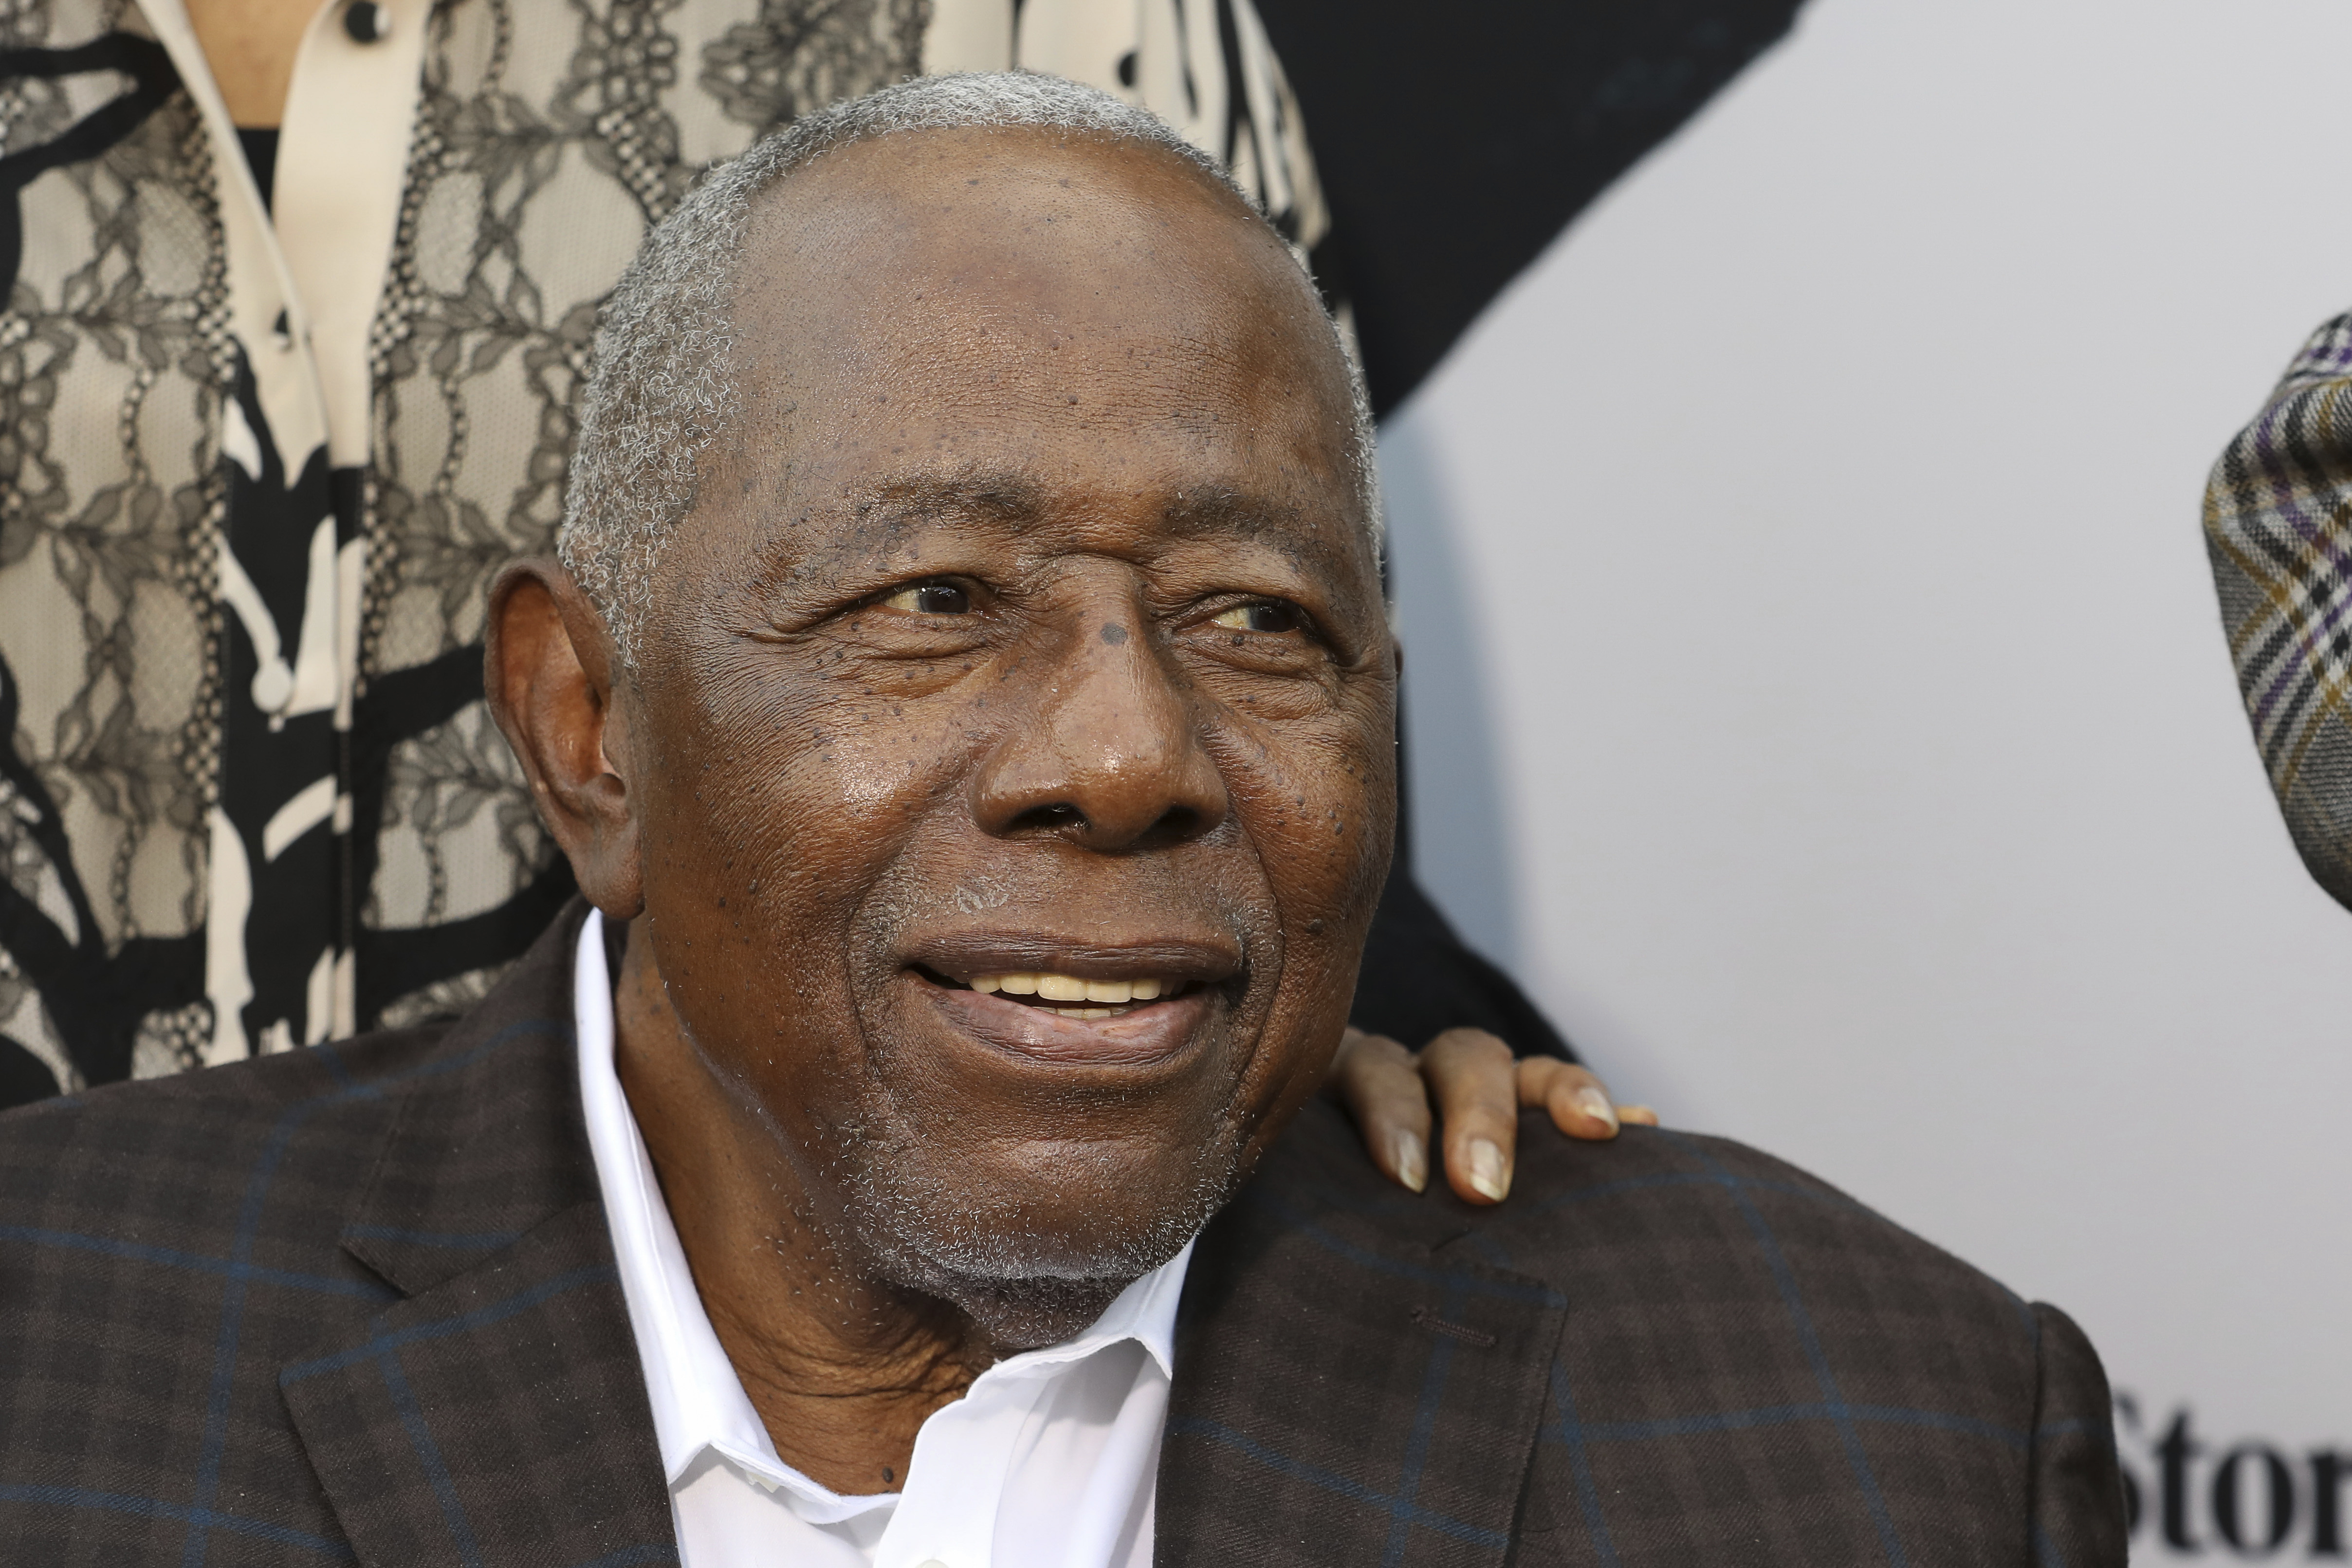 Hank Aaron, Braves legend and MLB home run king, dies at 86